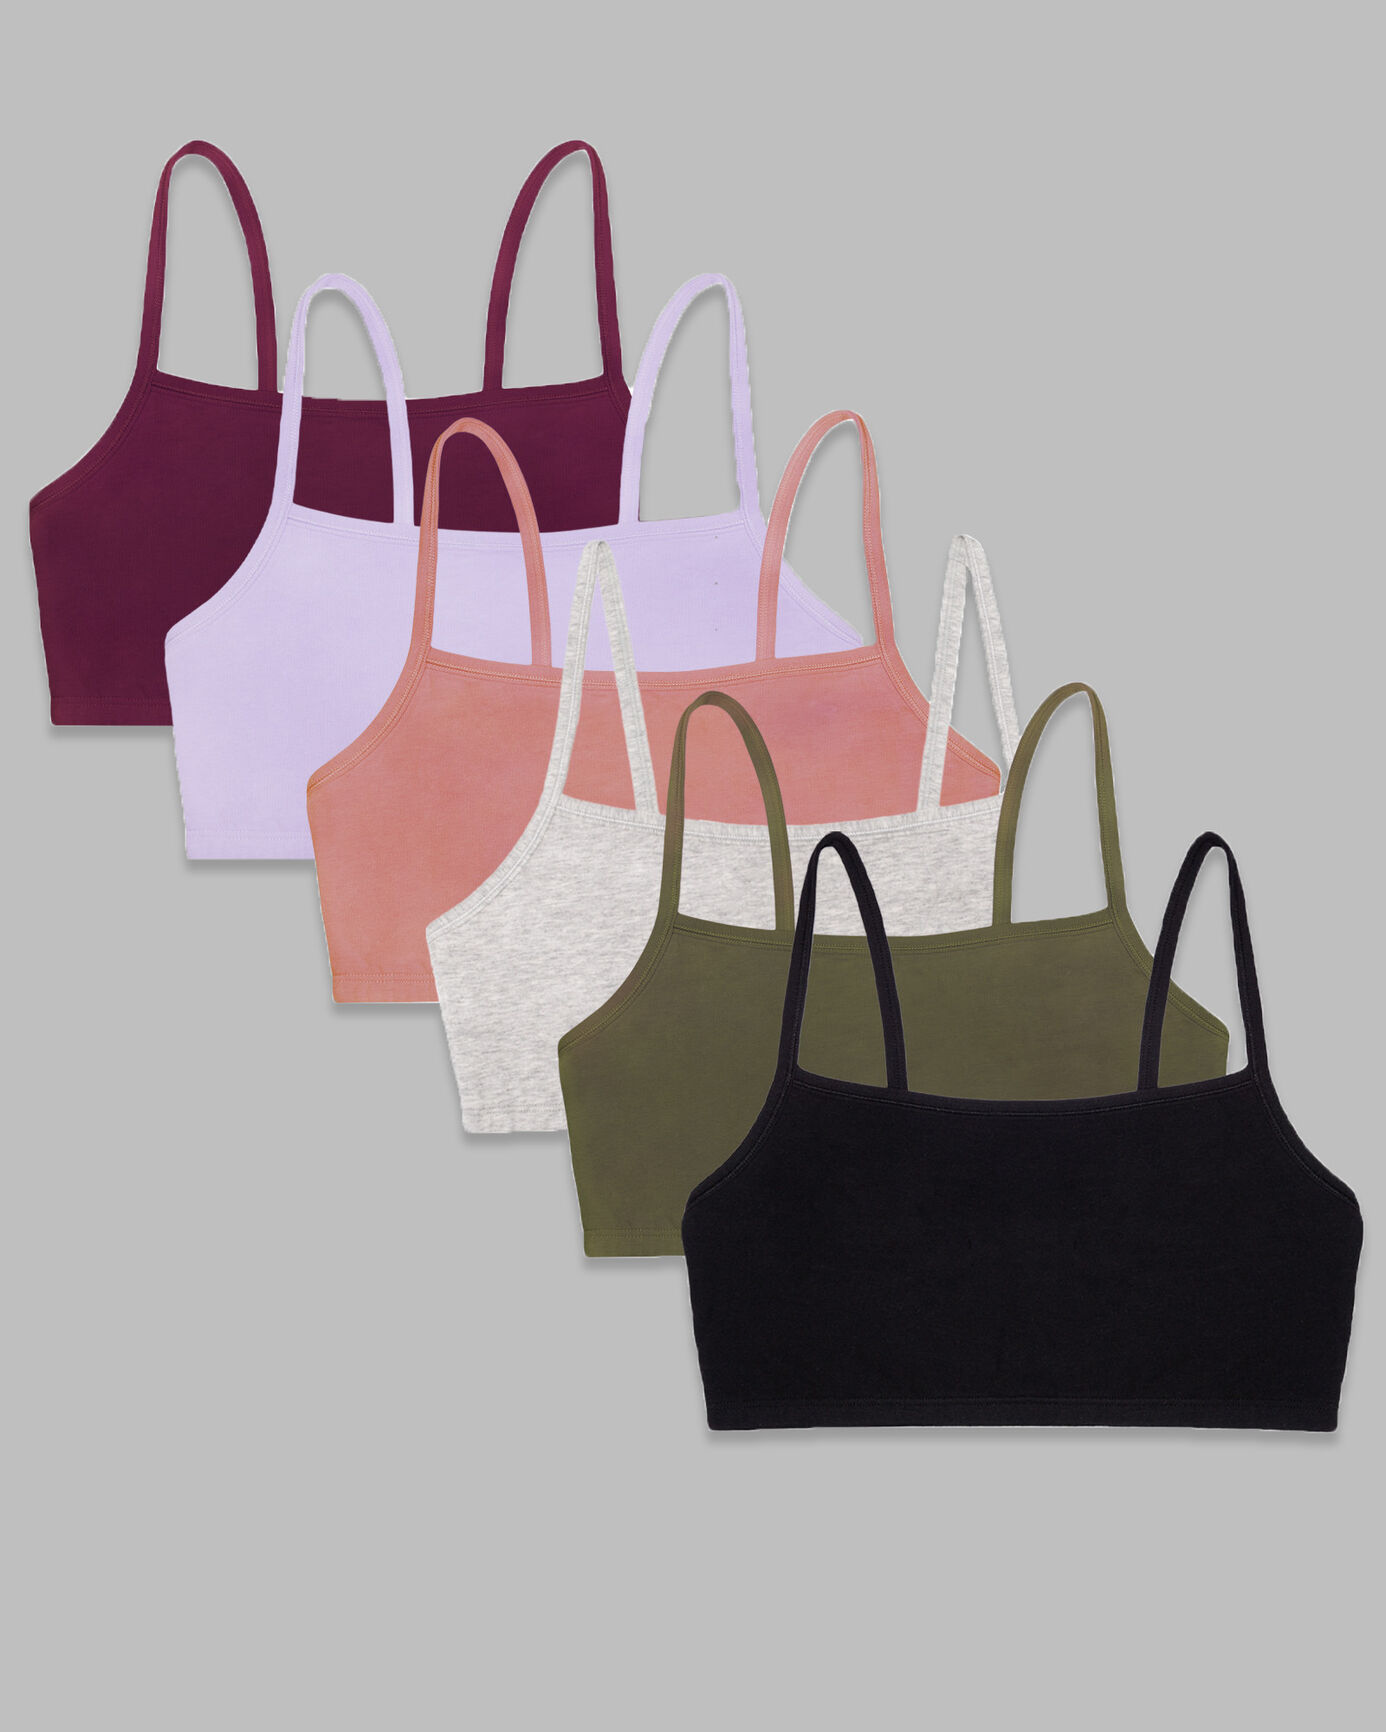 Highly Rated Fruit of the Loom 3-Packs of Sports Bras from $6.18